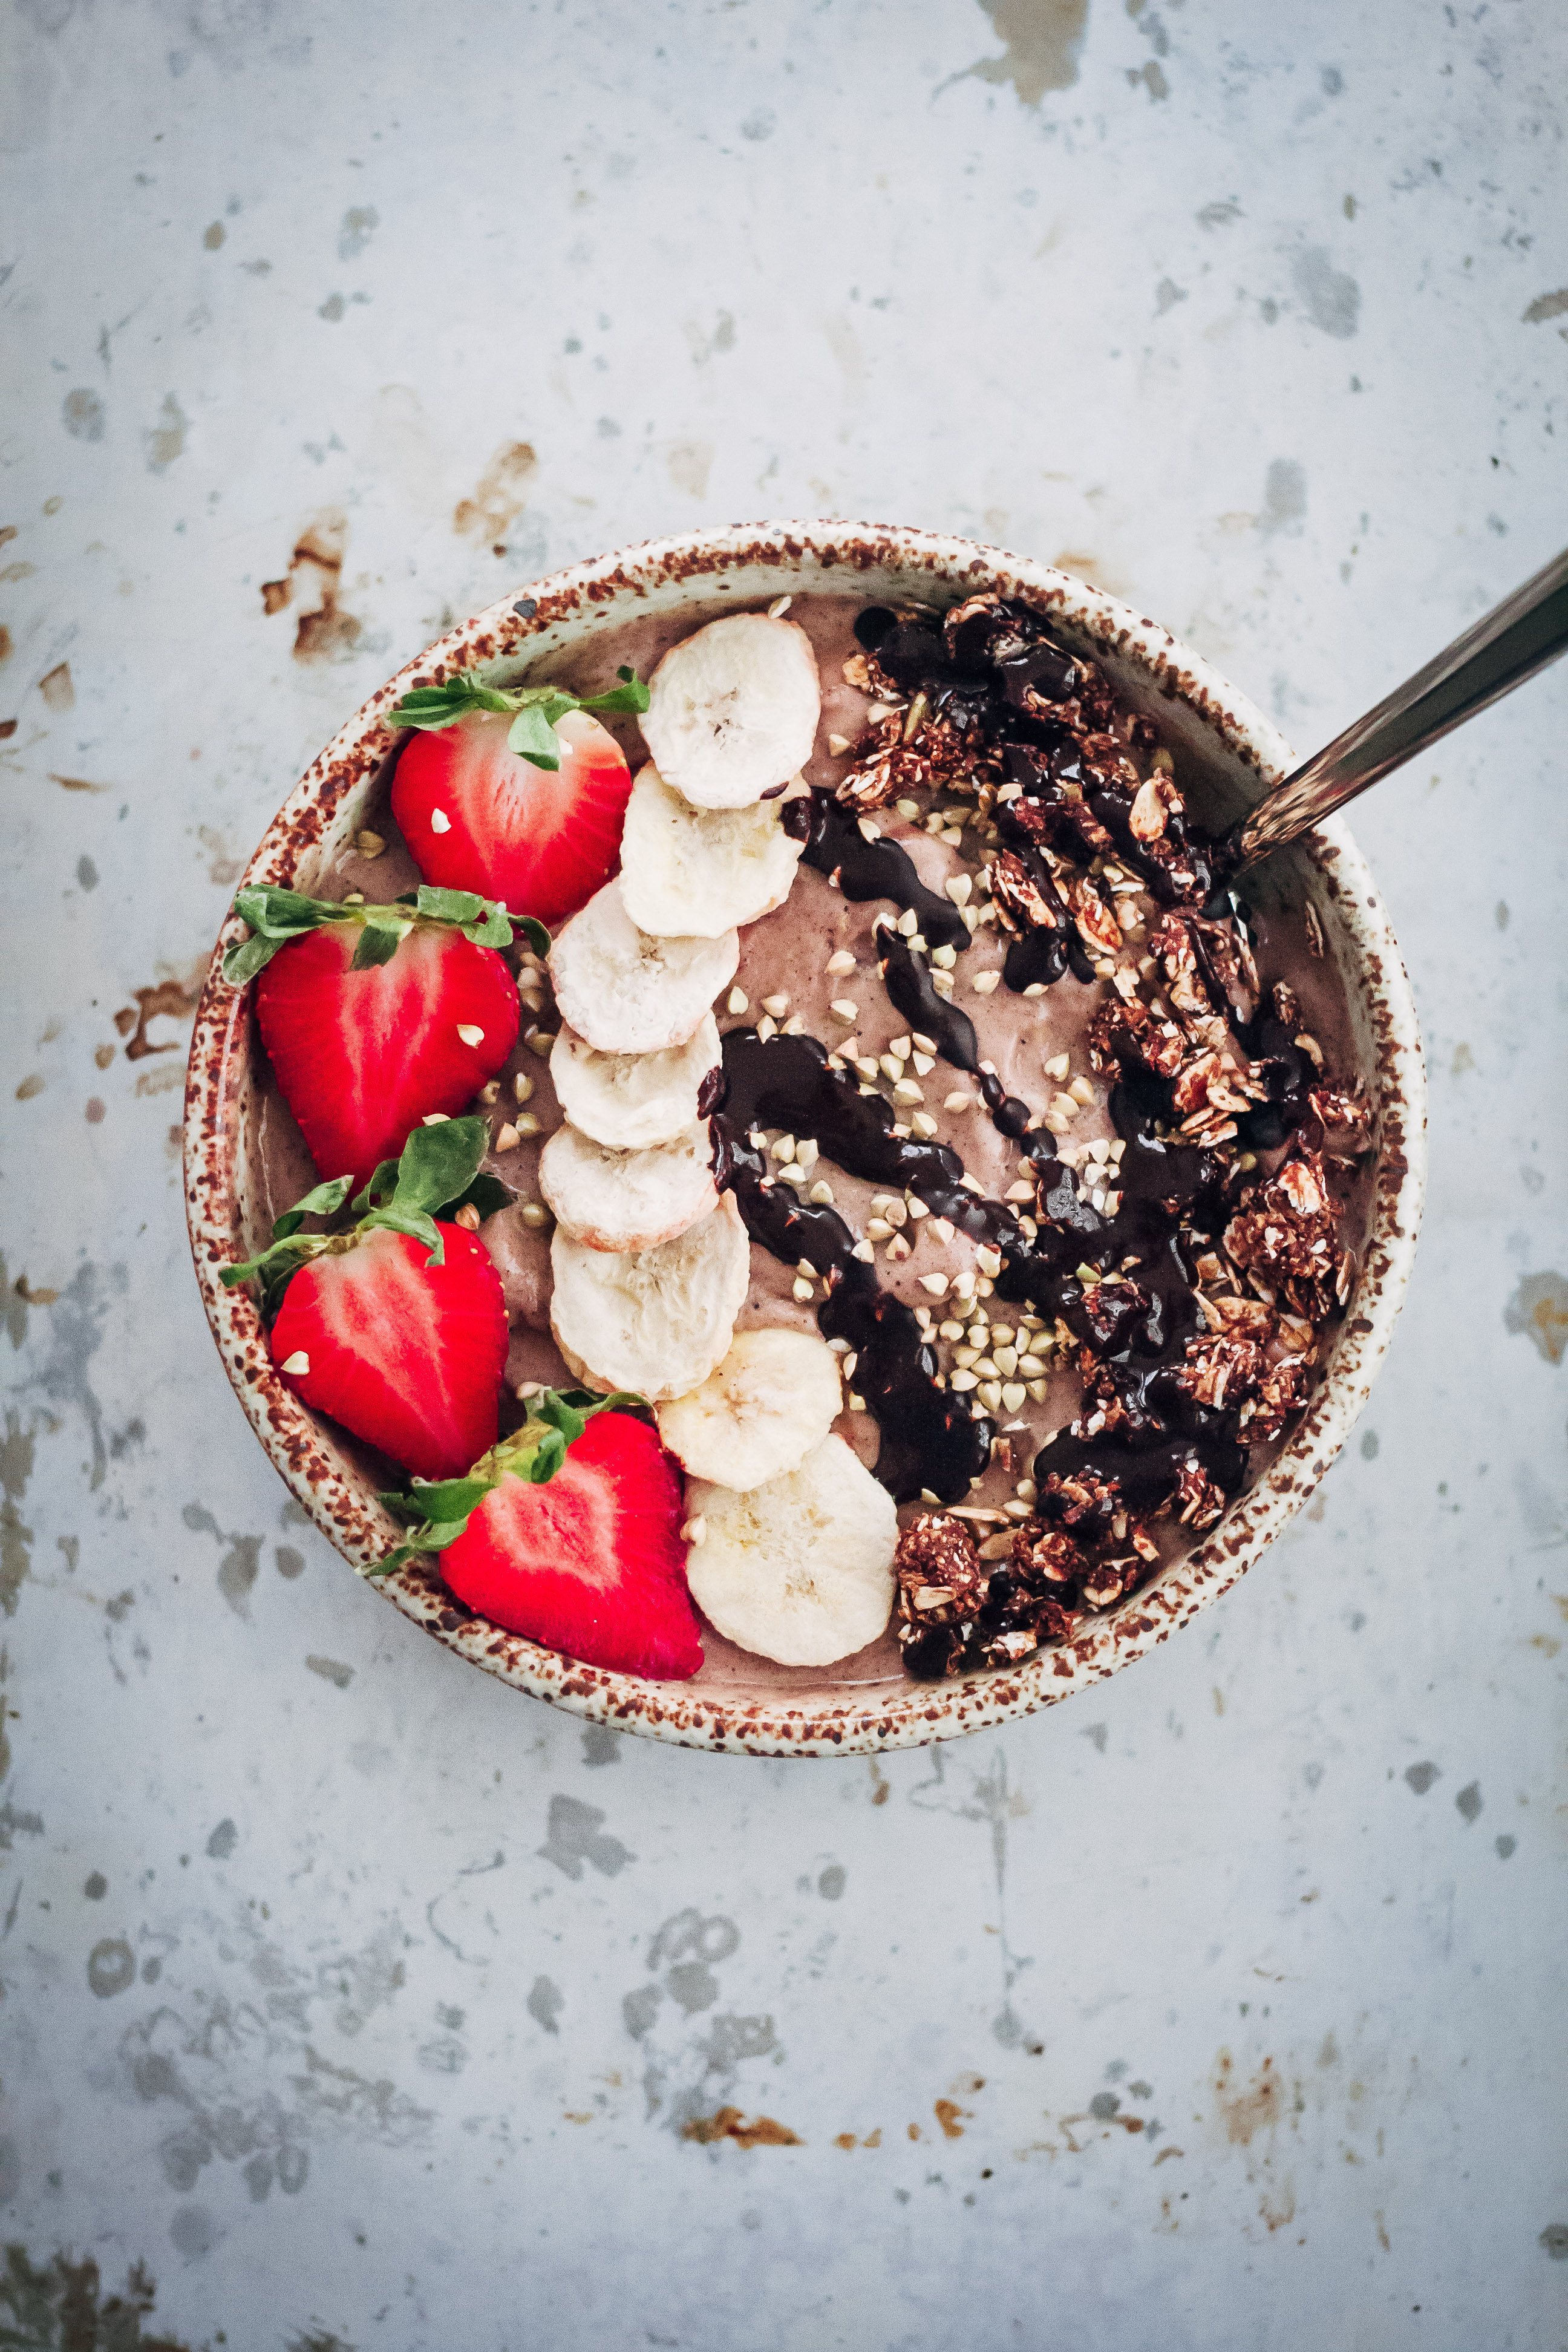 How To Make An Acai Bowl | Well and Full | #vegan #recipe